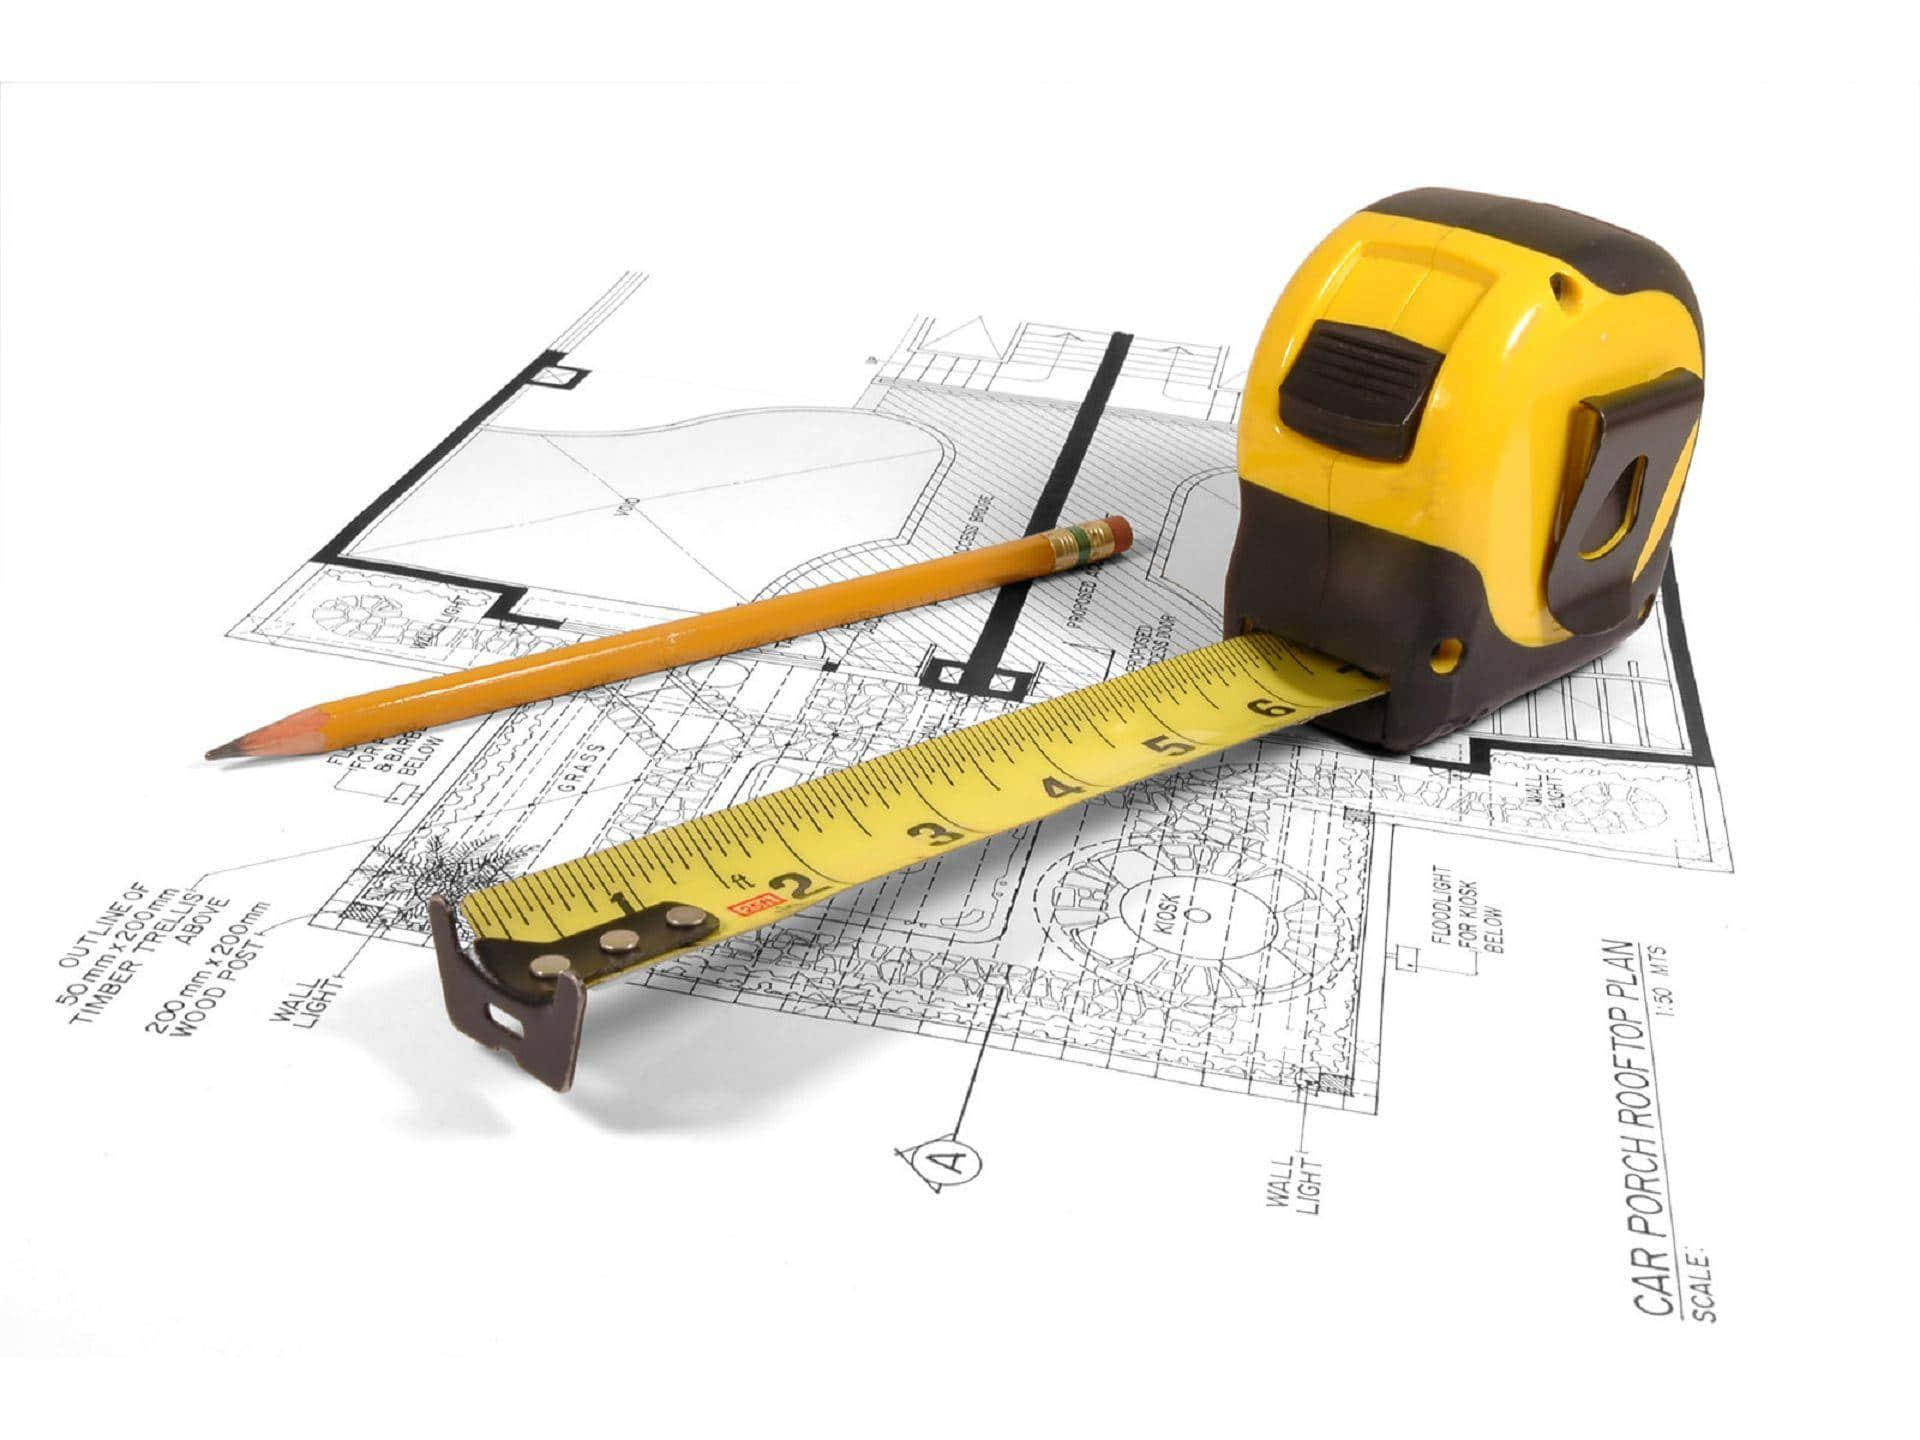 A Tape Measure And Pencil On Top Of Blueprints